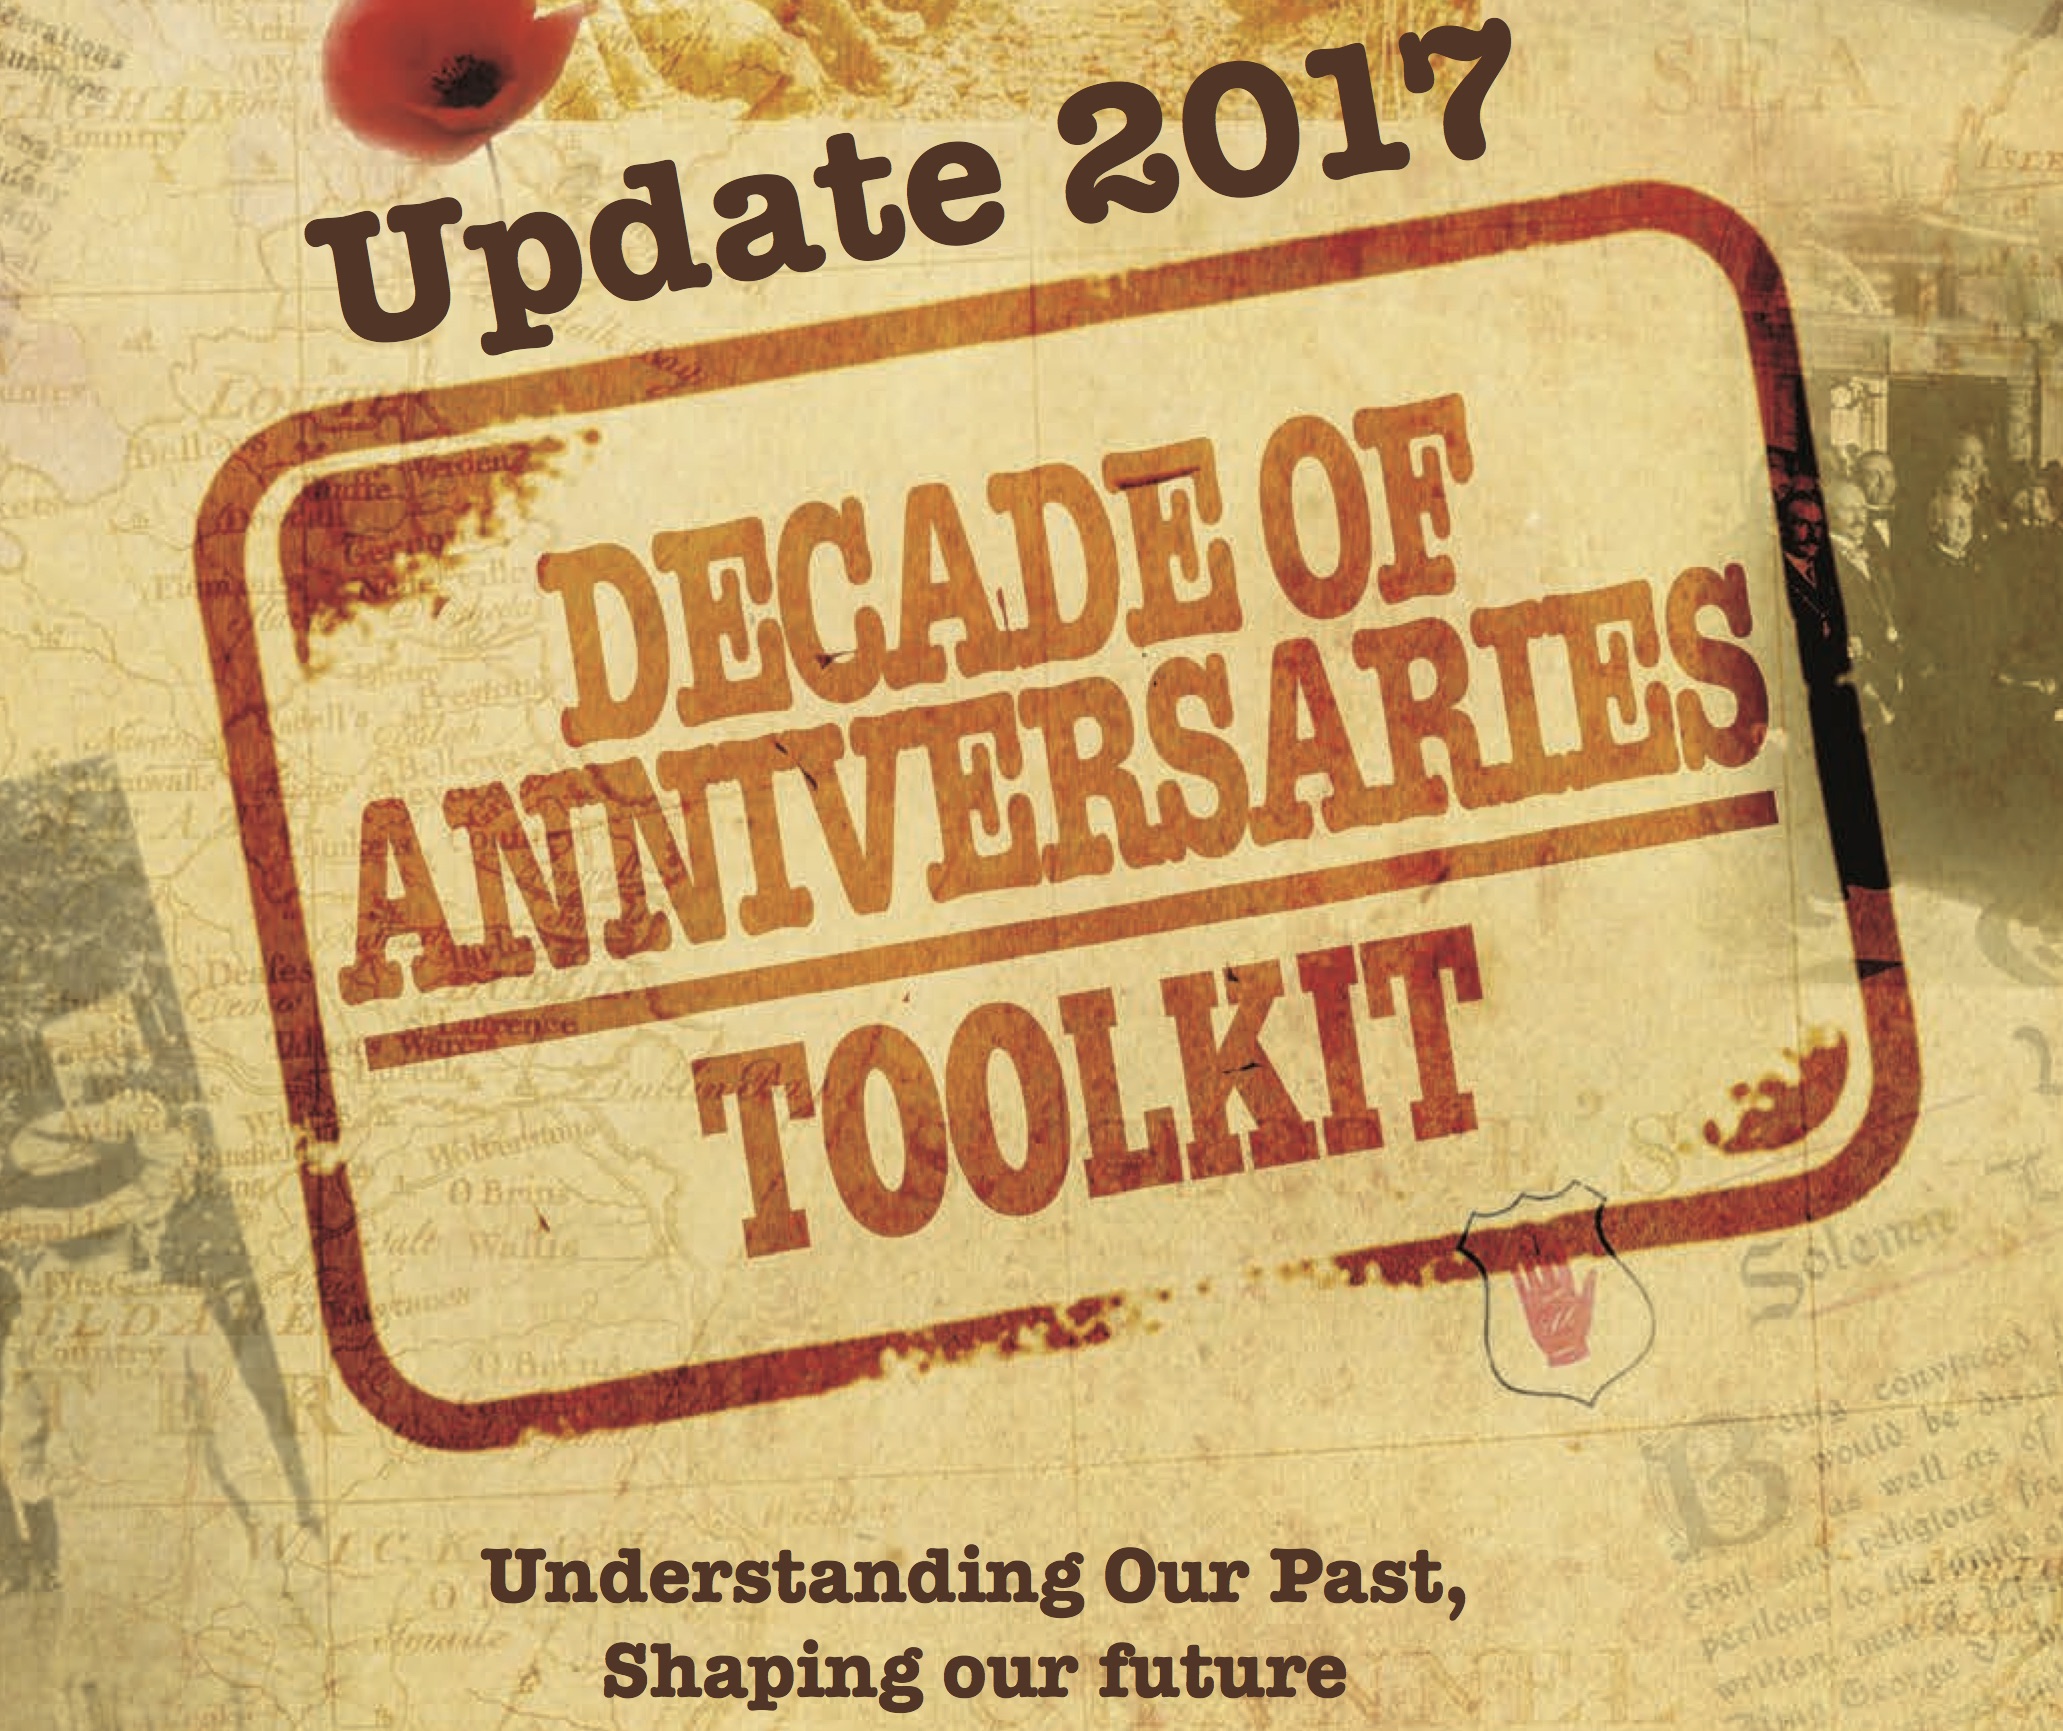 Decade of Anniversaries Toolkit - Revised 2017 Edition